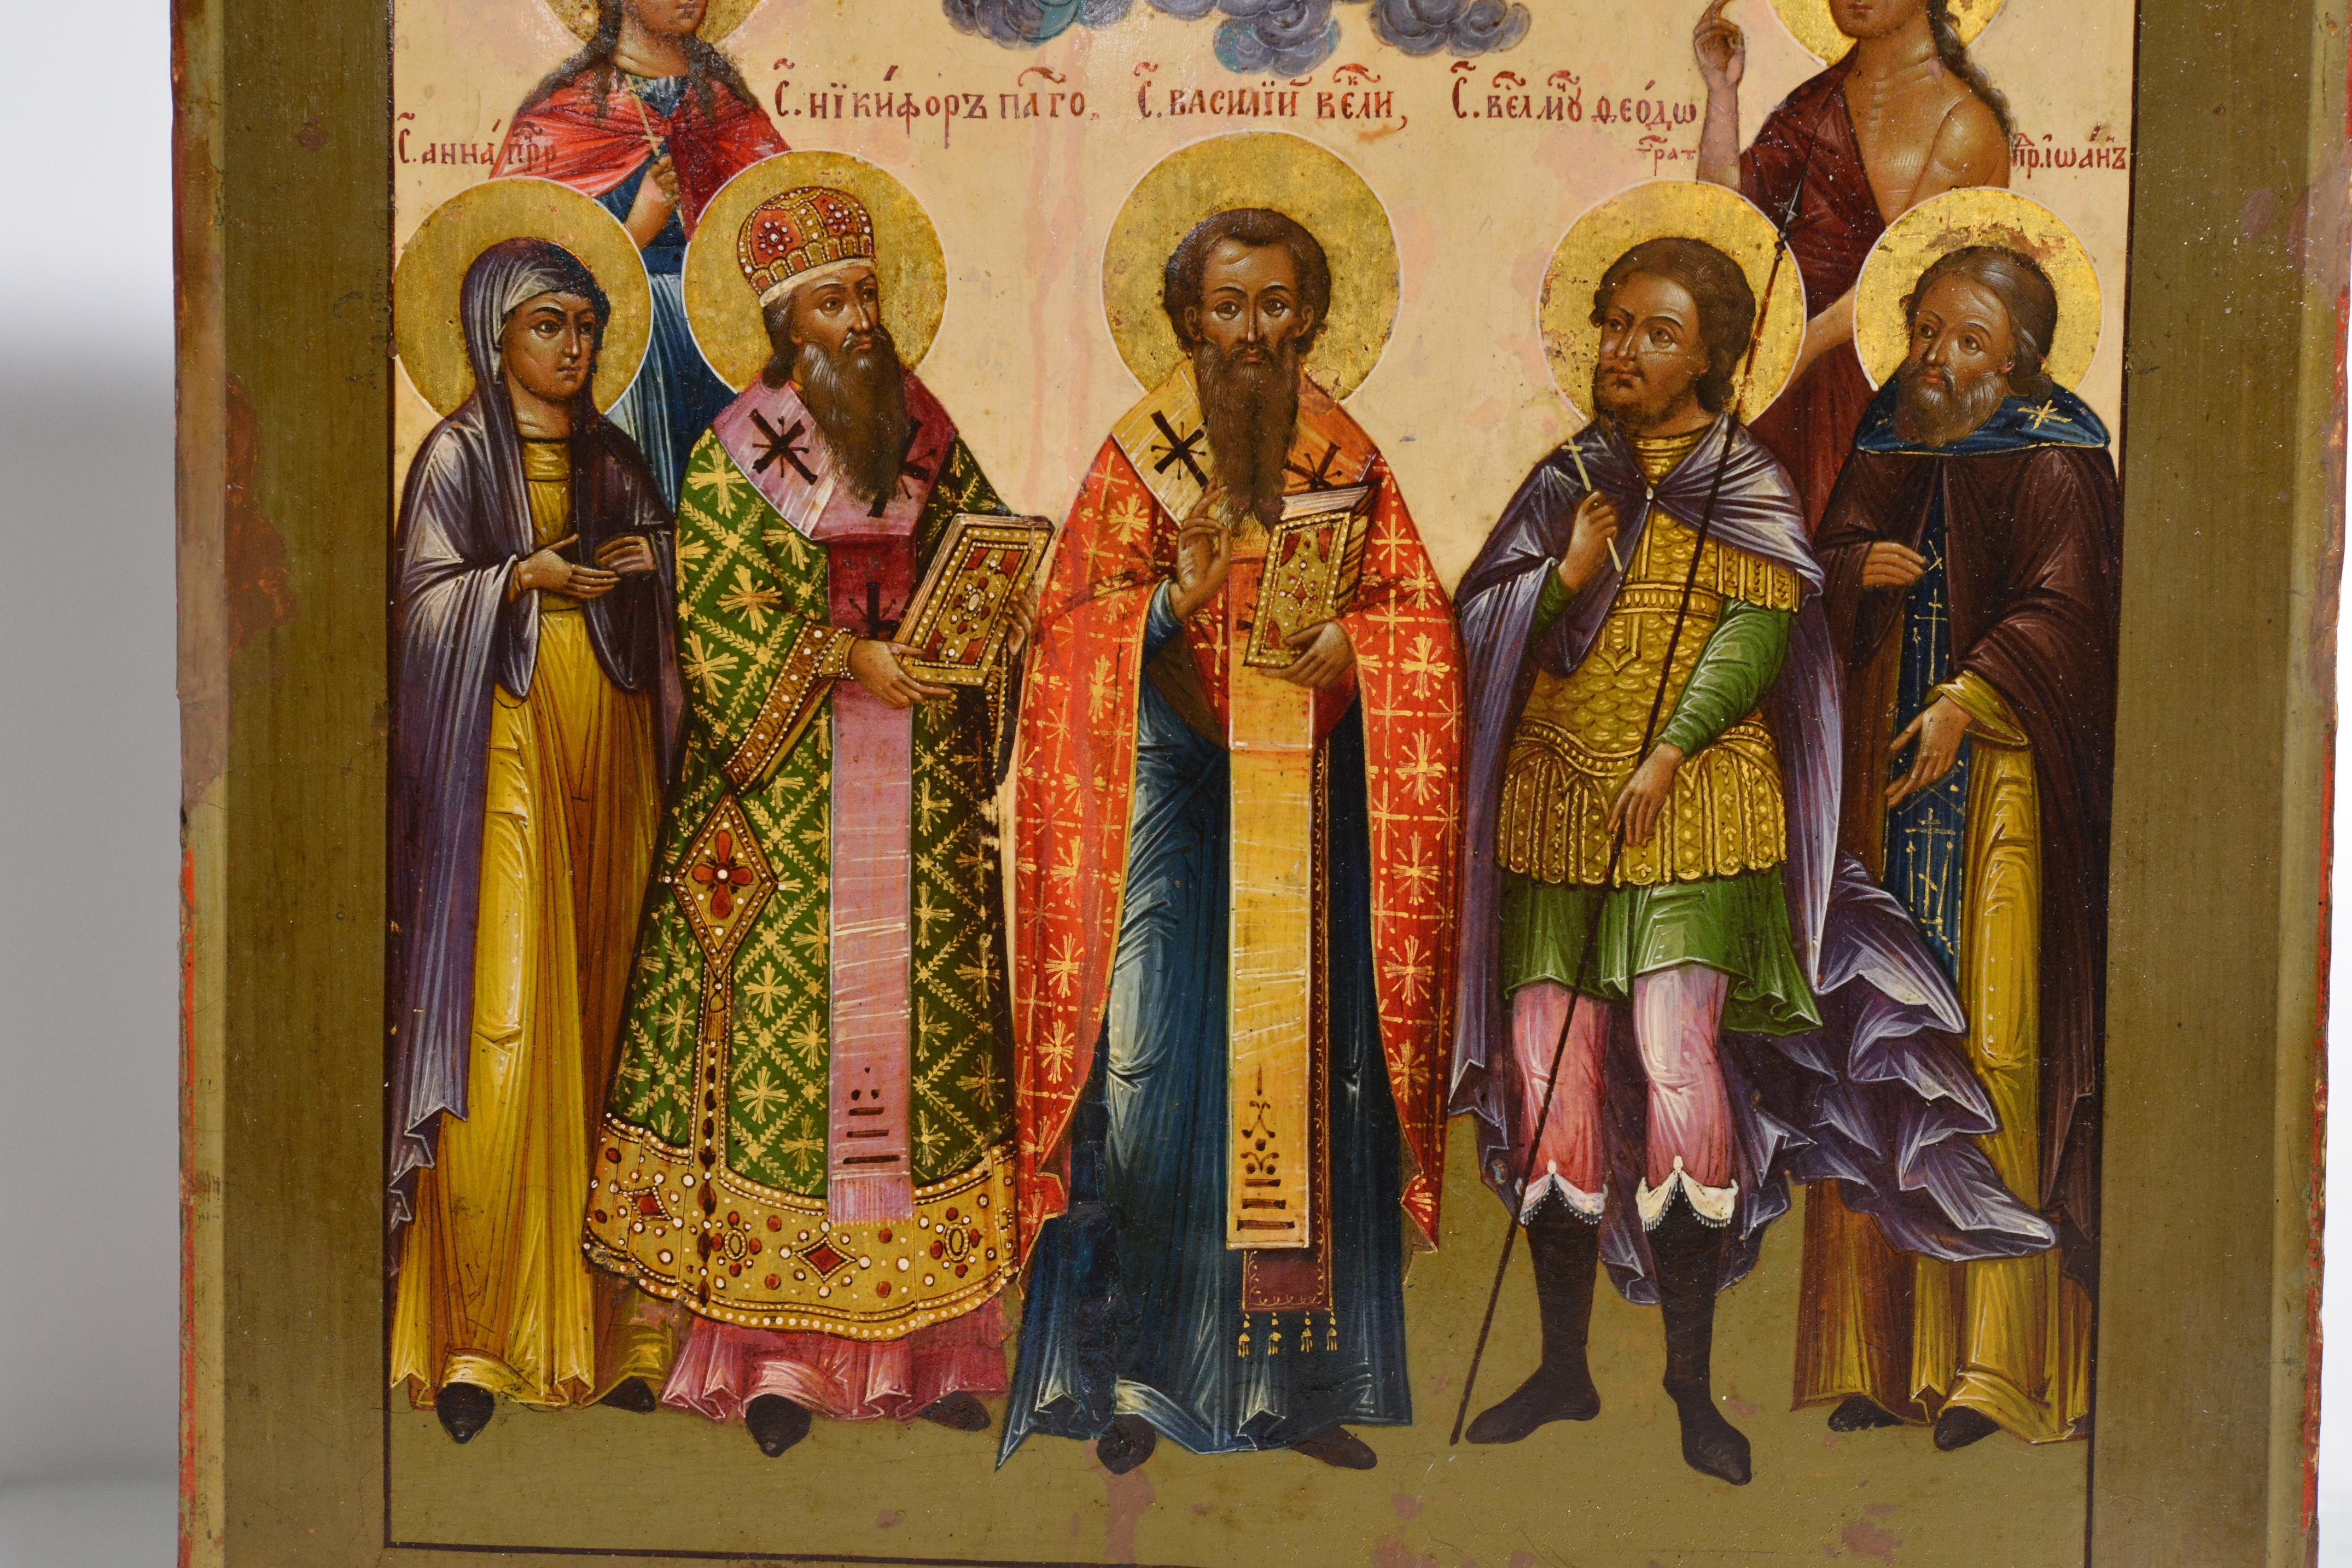 Presumably Yaroslavl school, late 1800s. Exceptional painting quality, gemstone-based paints give the icon an outstanding appearance. From left to right: Reverend Anna, Great Martyr Catherine of Alexandria, Nikephoros I of Constantinople, Basil the